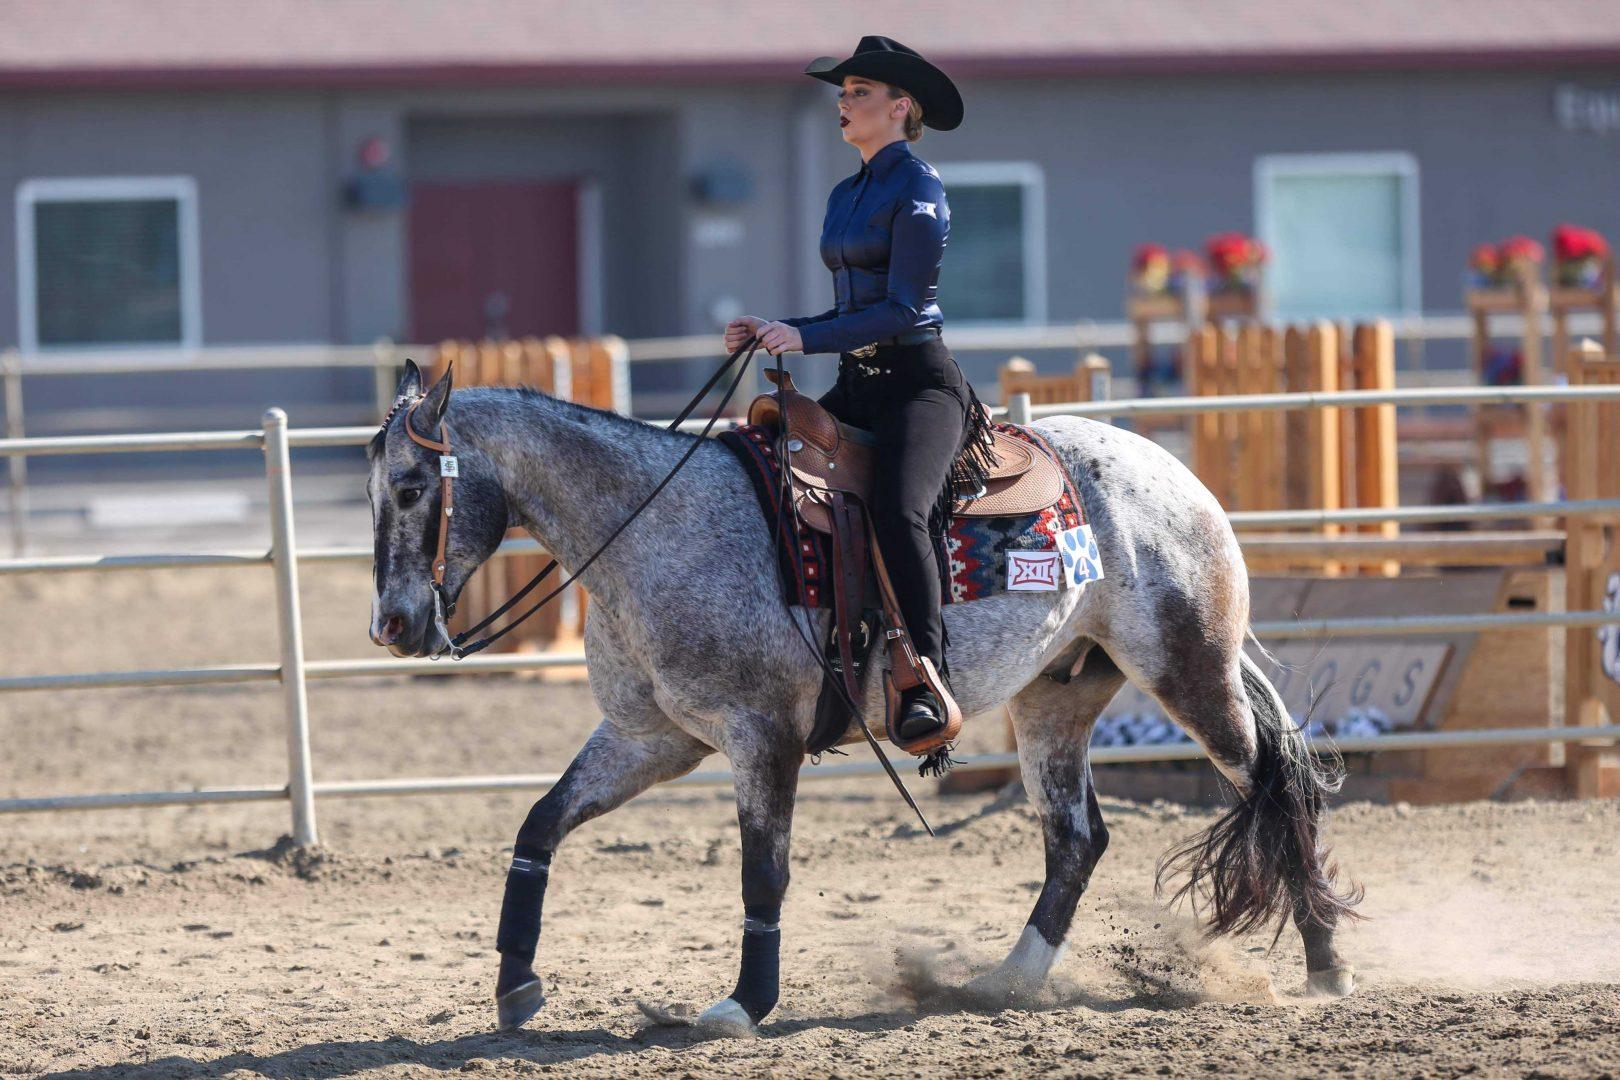 Kameron Thorn takes part in the horsemanship competition against Auburn at the Student Horse Center on Saturday, Feb. 1, 2020. (Larry Valenzuela/The Collegian)